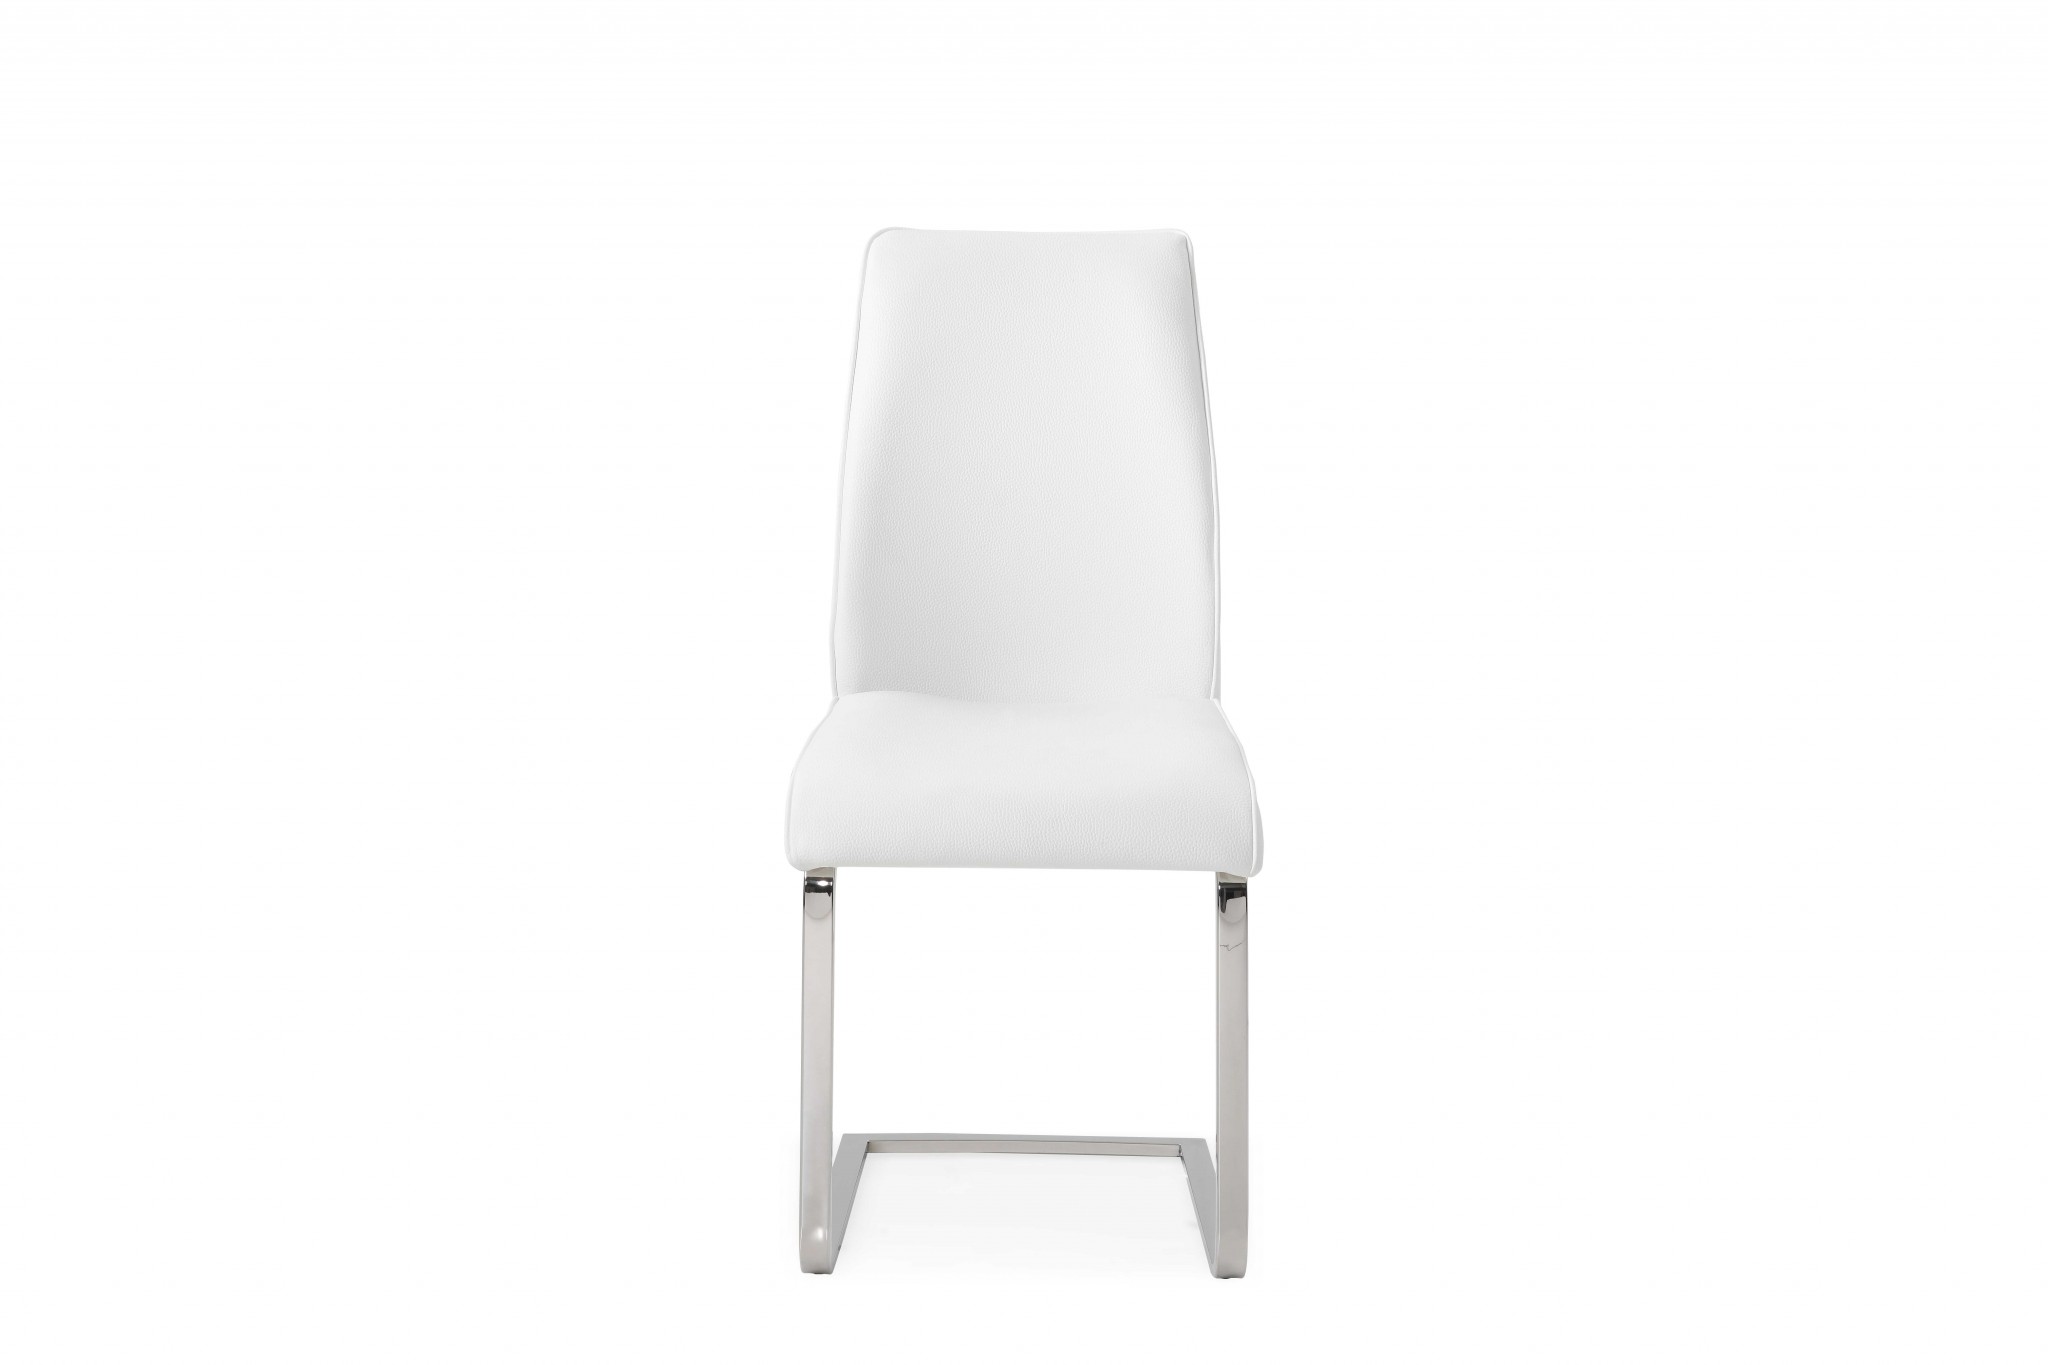 18" X 24" X 39" White Faux Leather or Metal Dining Chair